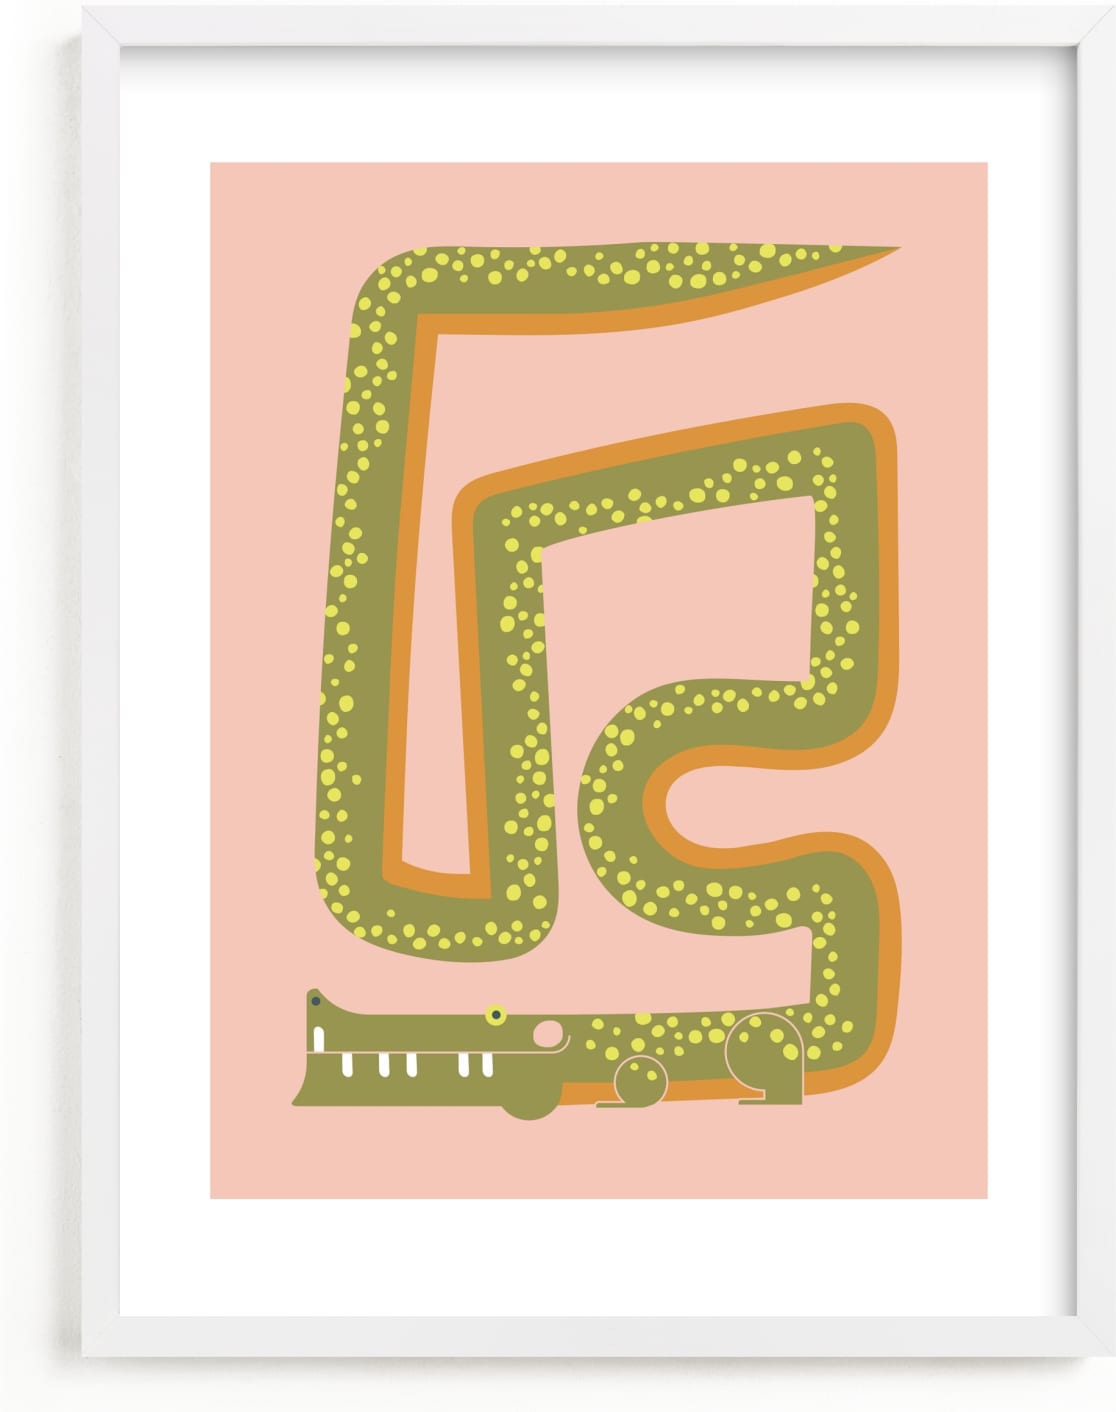 This is a pink kids wall art by Ampersand Design Studio called Twisty Alligator.